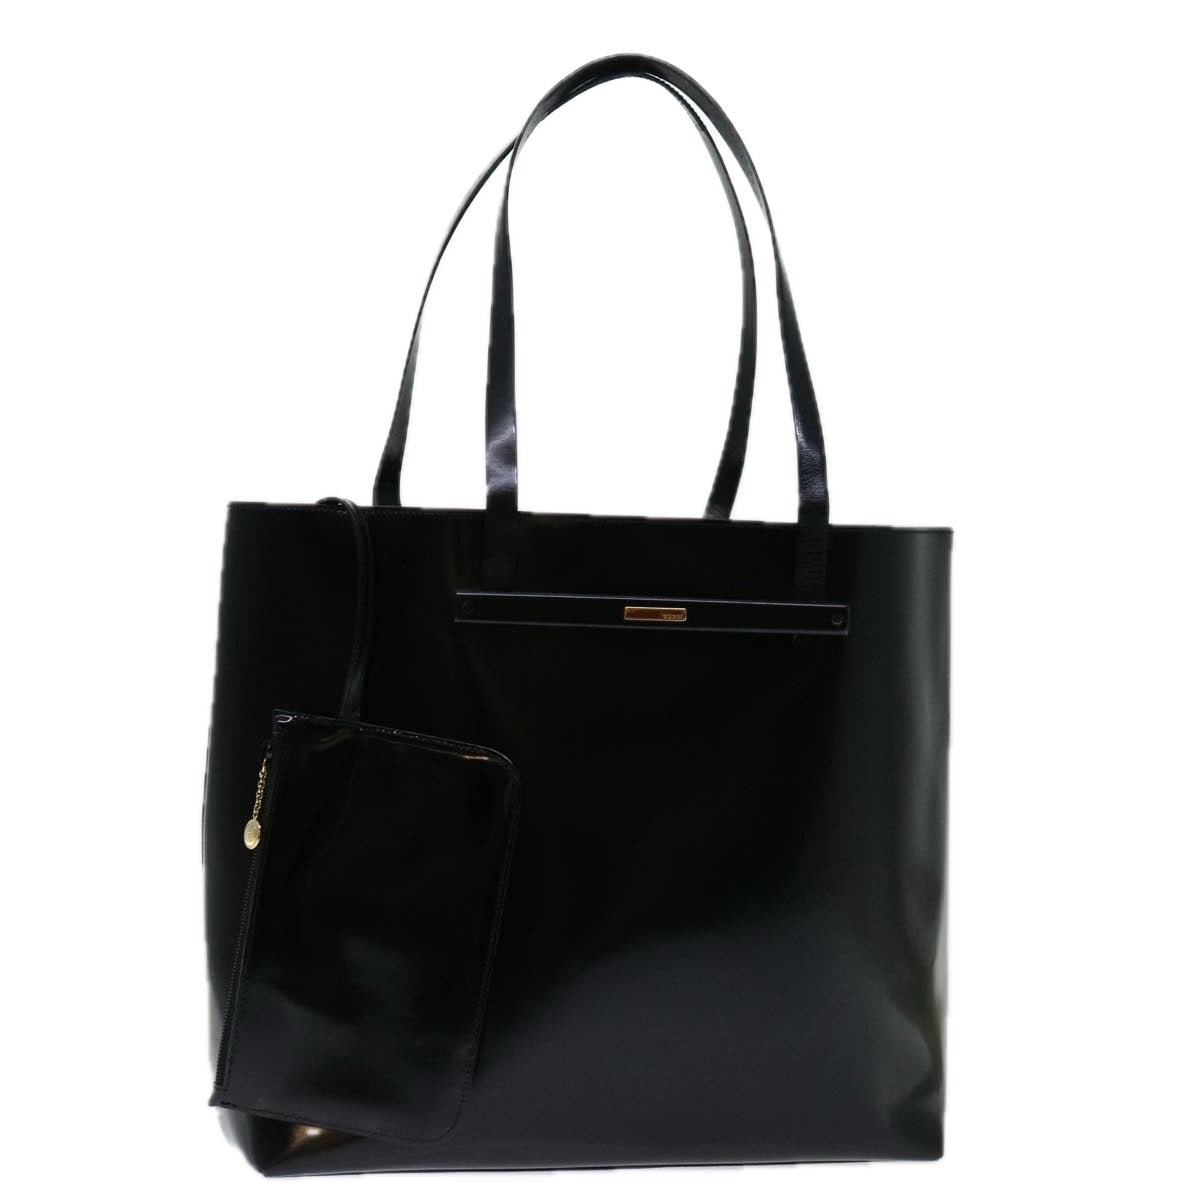 GUCCI Tote Bag Patent leather Black Auth ep3770